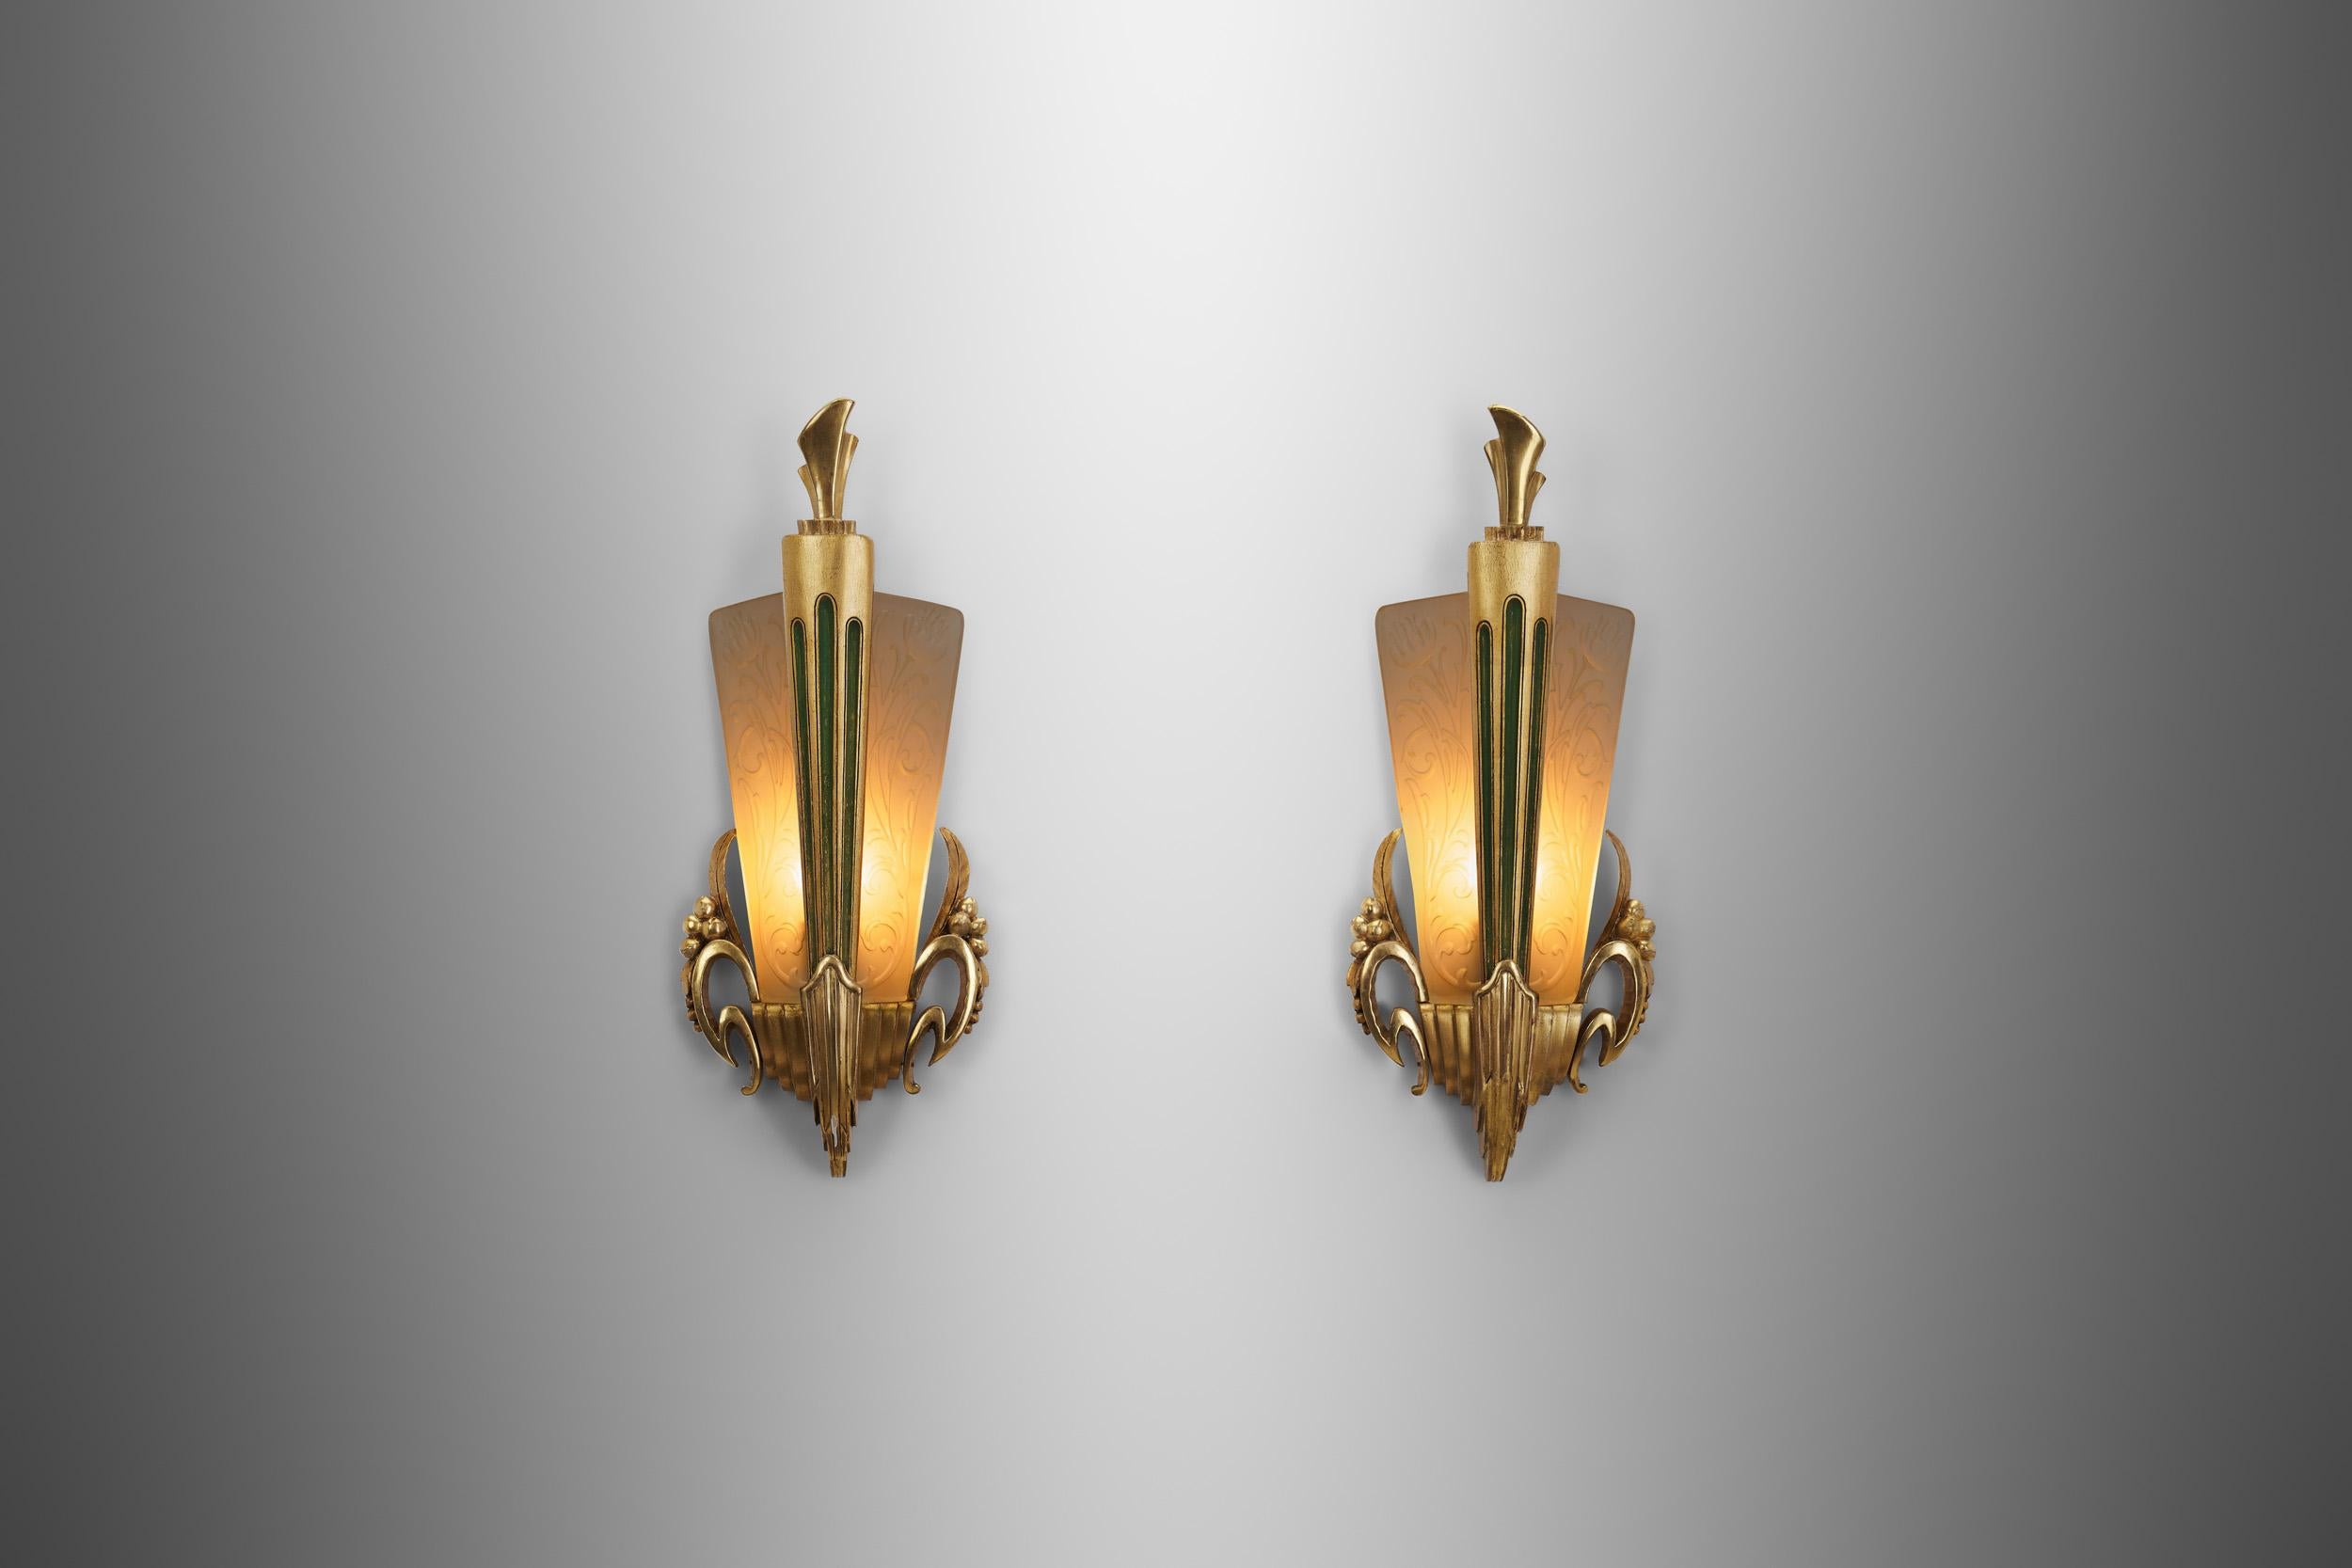 Glass and Giltwood Wall Lights by Broman, Europe Early 20th Century For Sale 1